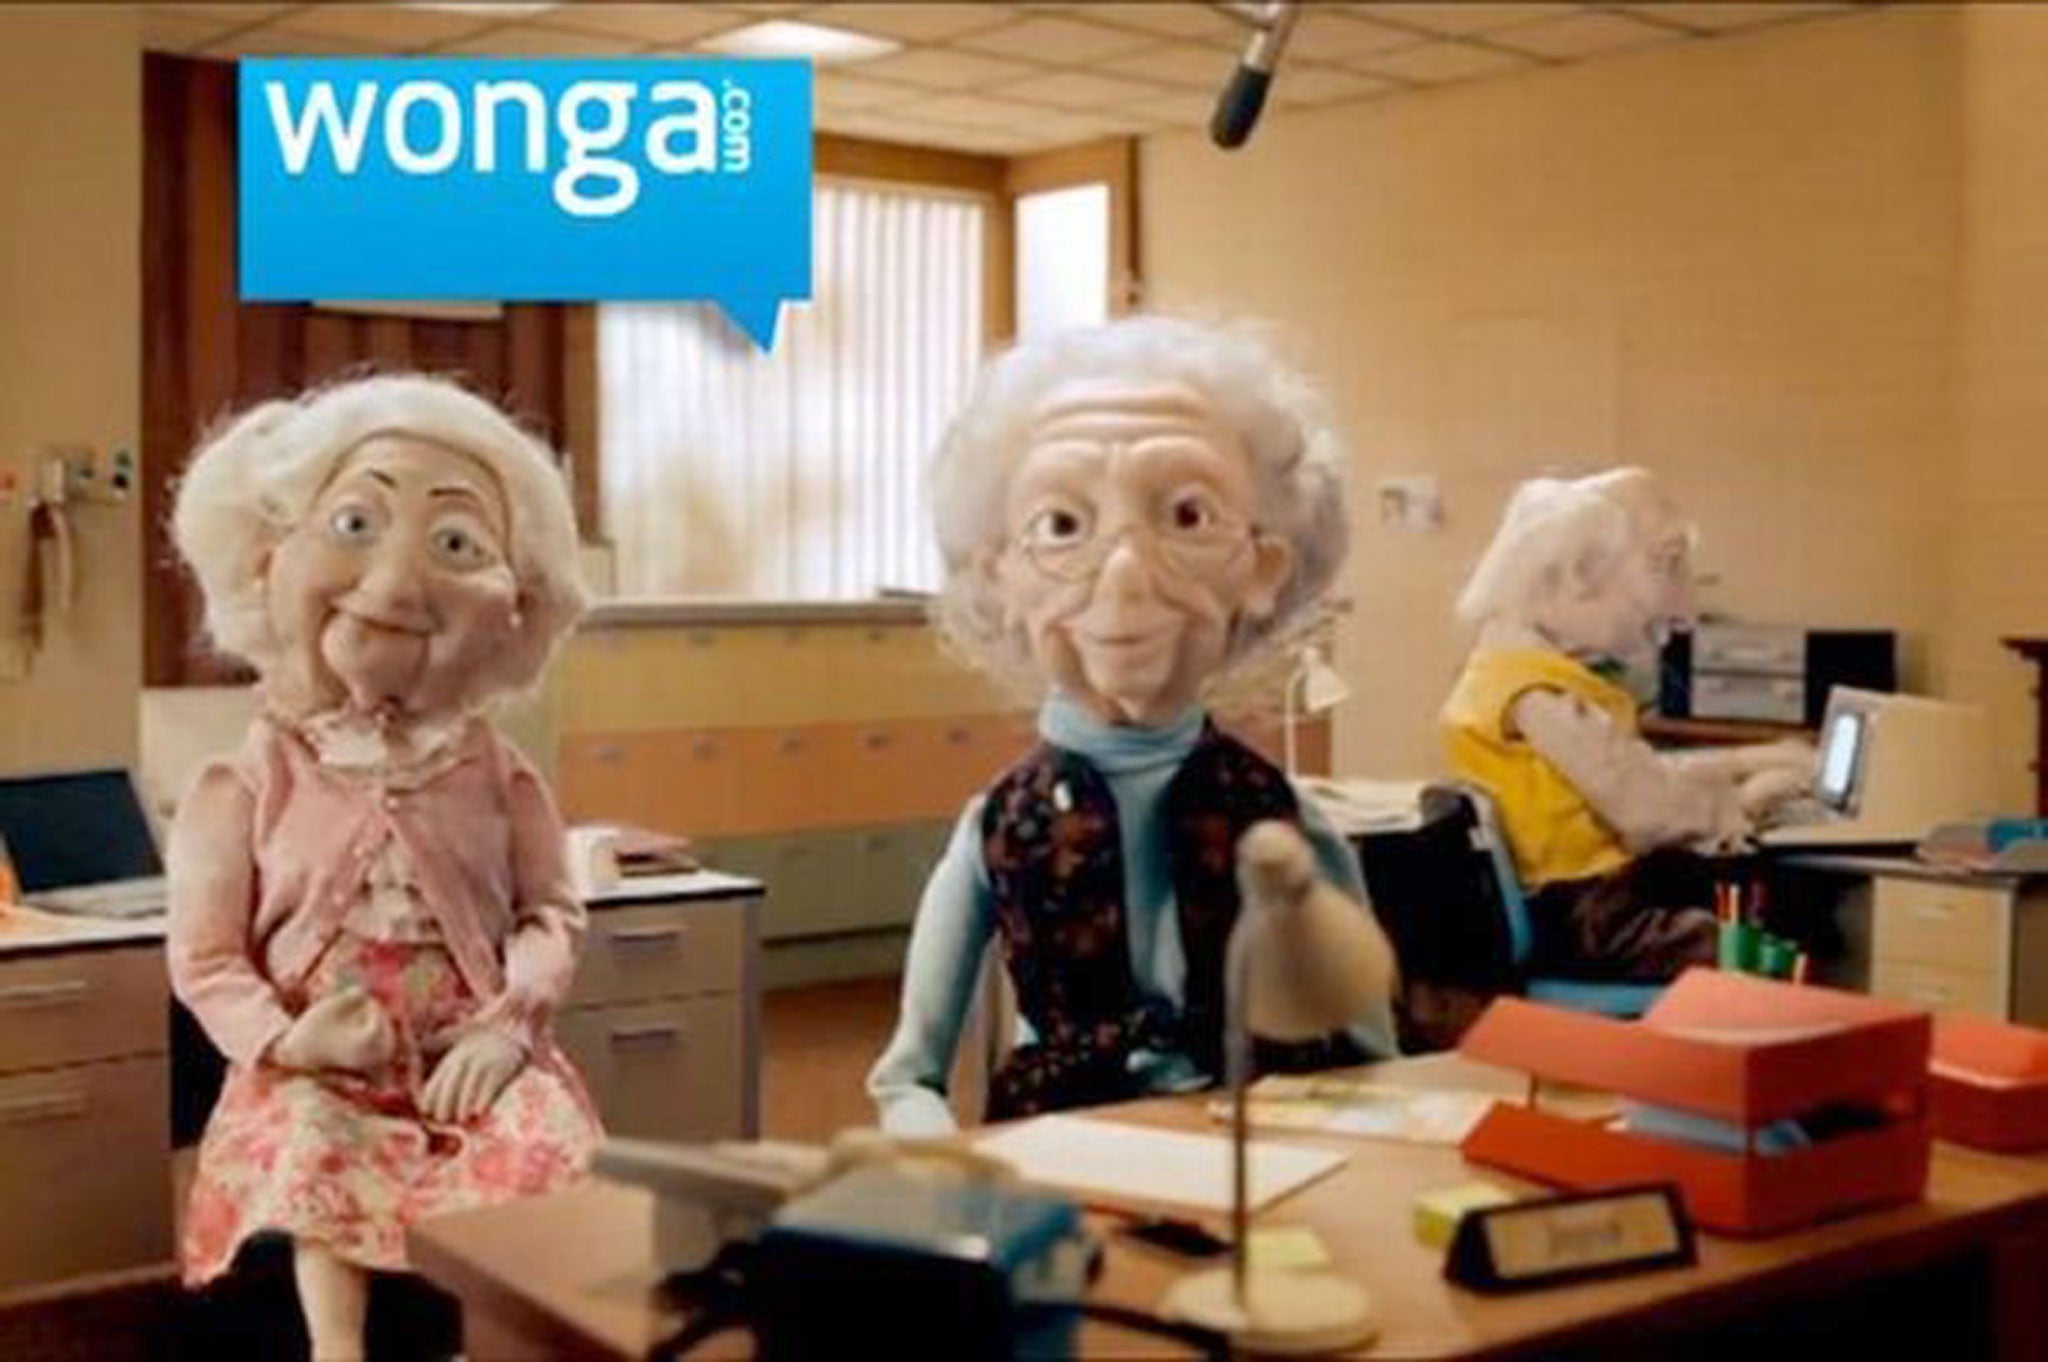 The committee heard evidence from consumer campaigners who warned that 'cartoon puppets' used on payday lenders' adverts suggest that taking out a loan can be fun